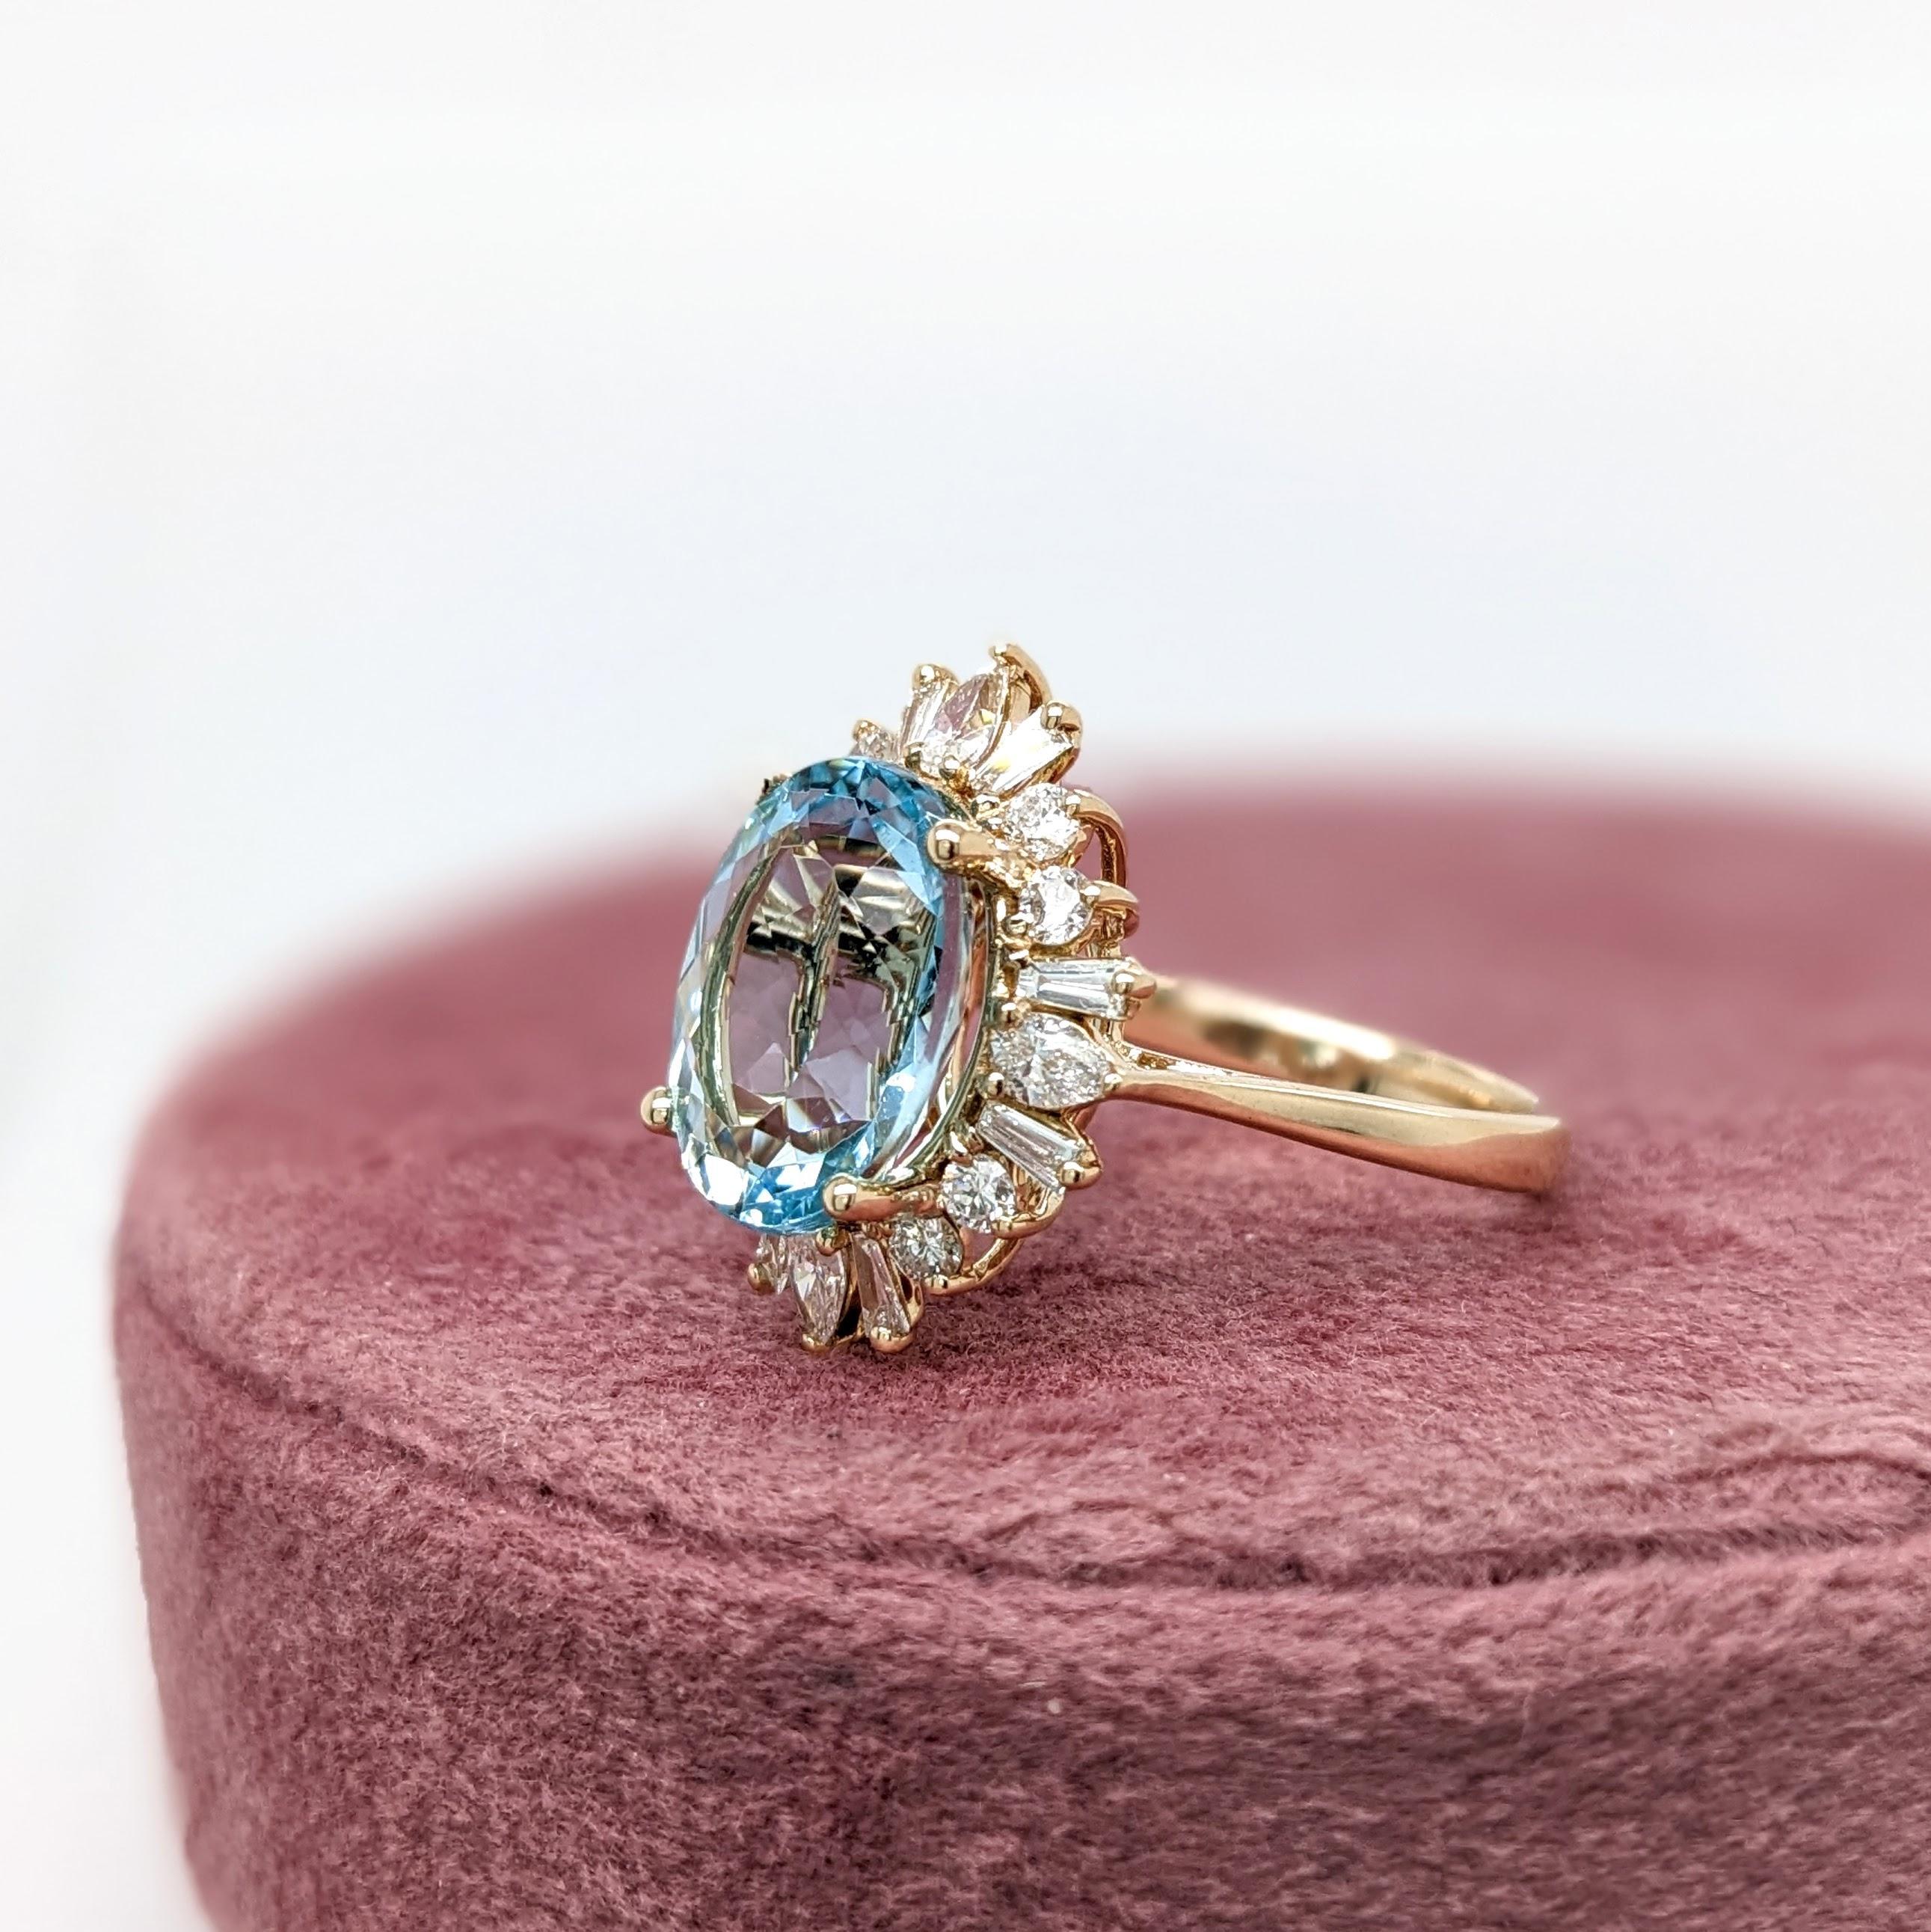 Oval Cut Fancy Aquamarine Ring w Natural Diamond Halo in Solid 14K Yellow Gold Oval 11x9